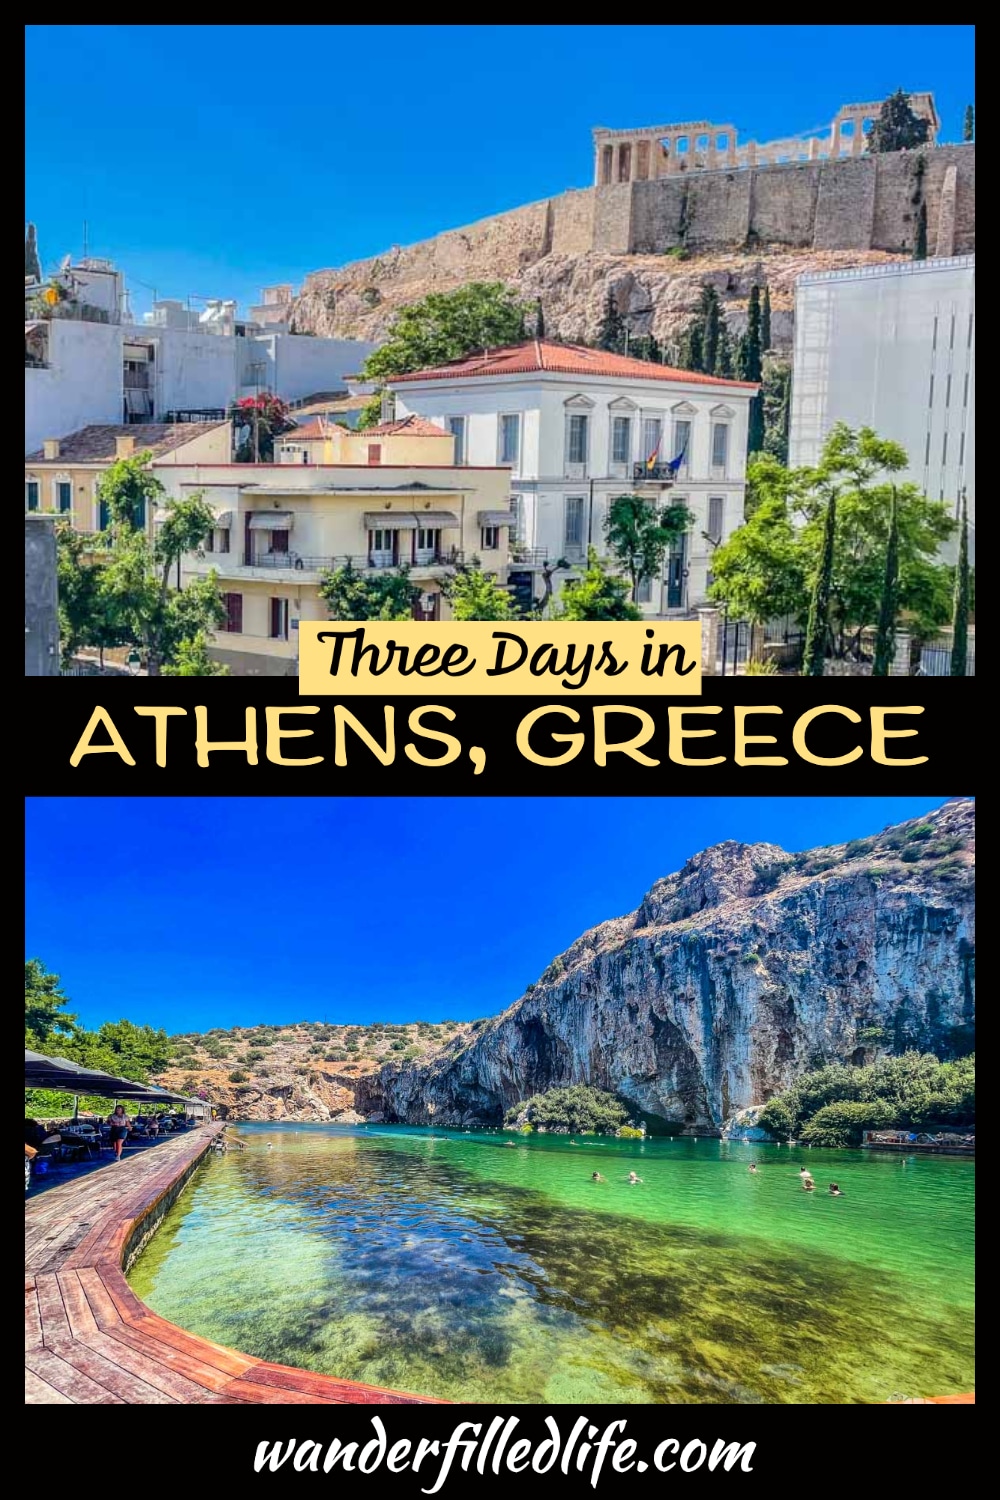 With three days in Athens, you can enjoy numerous ancient Greeks ruins and enjoy time along the coast, better known as the Athenian Riviera.